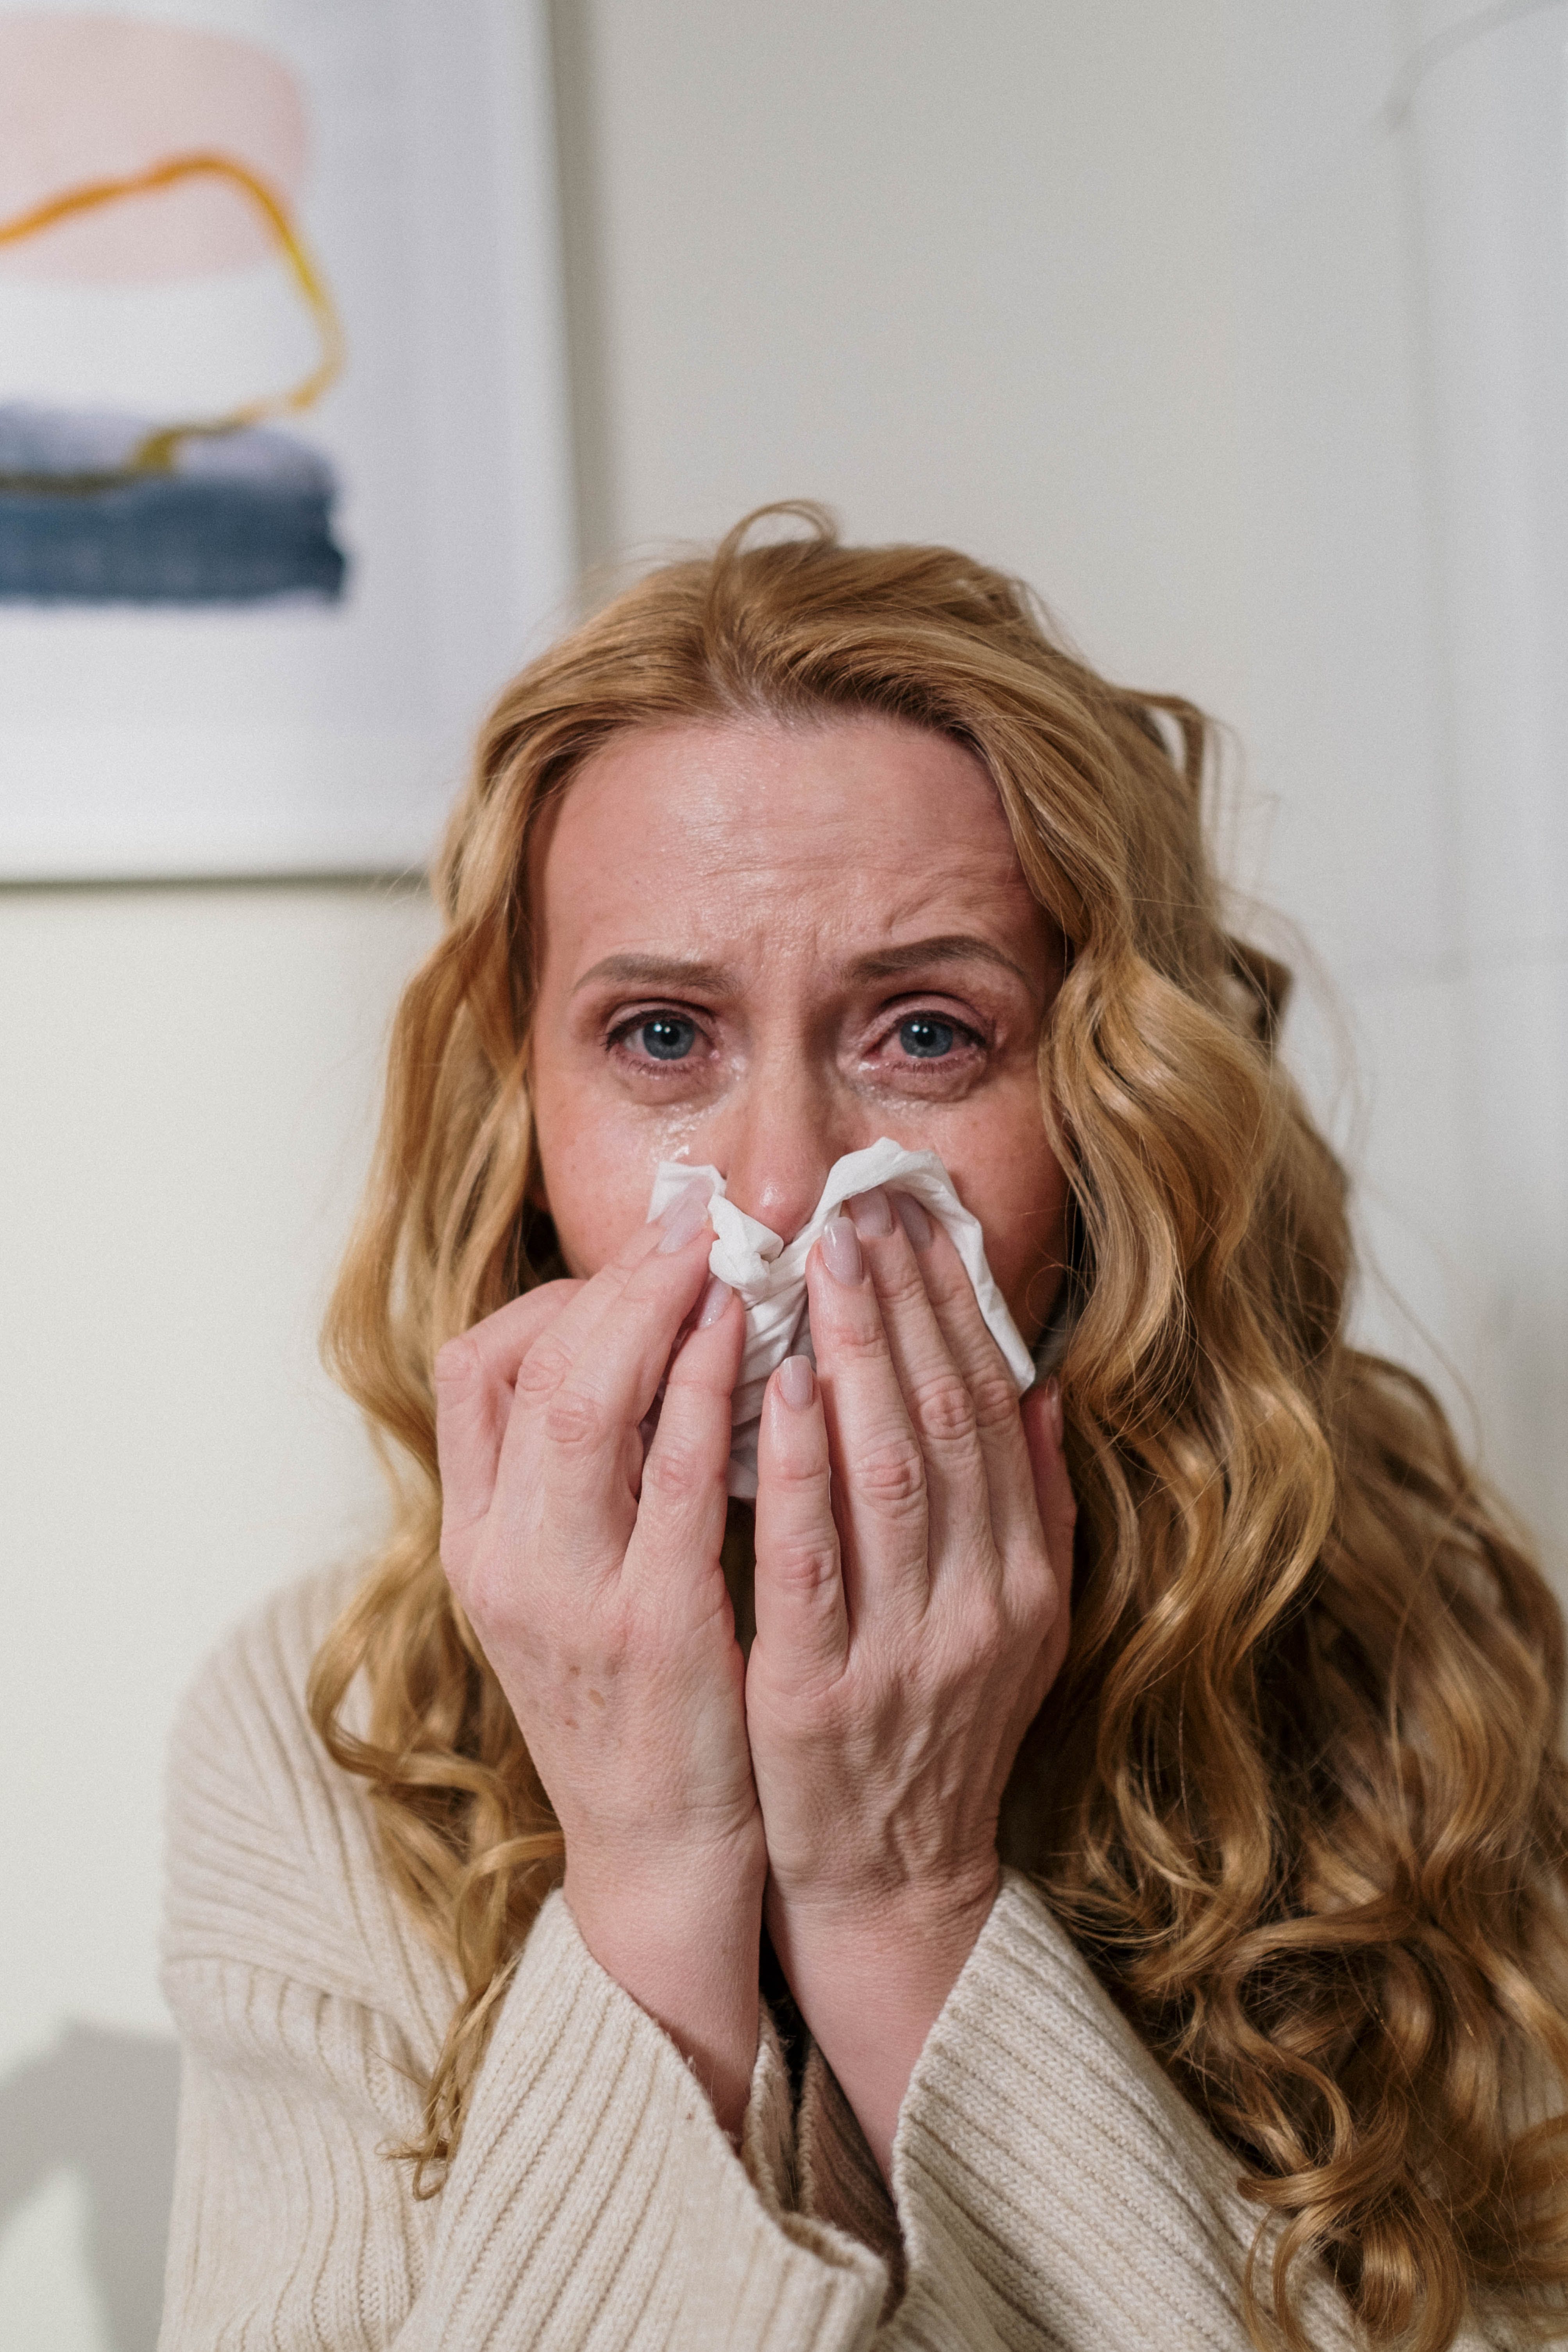 A woman suffering from allergies. | Source: Pexels